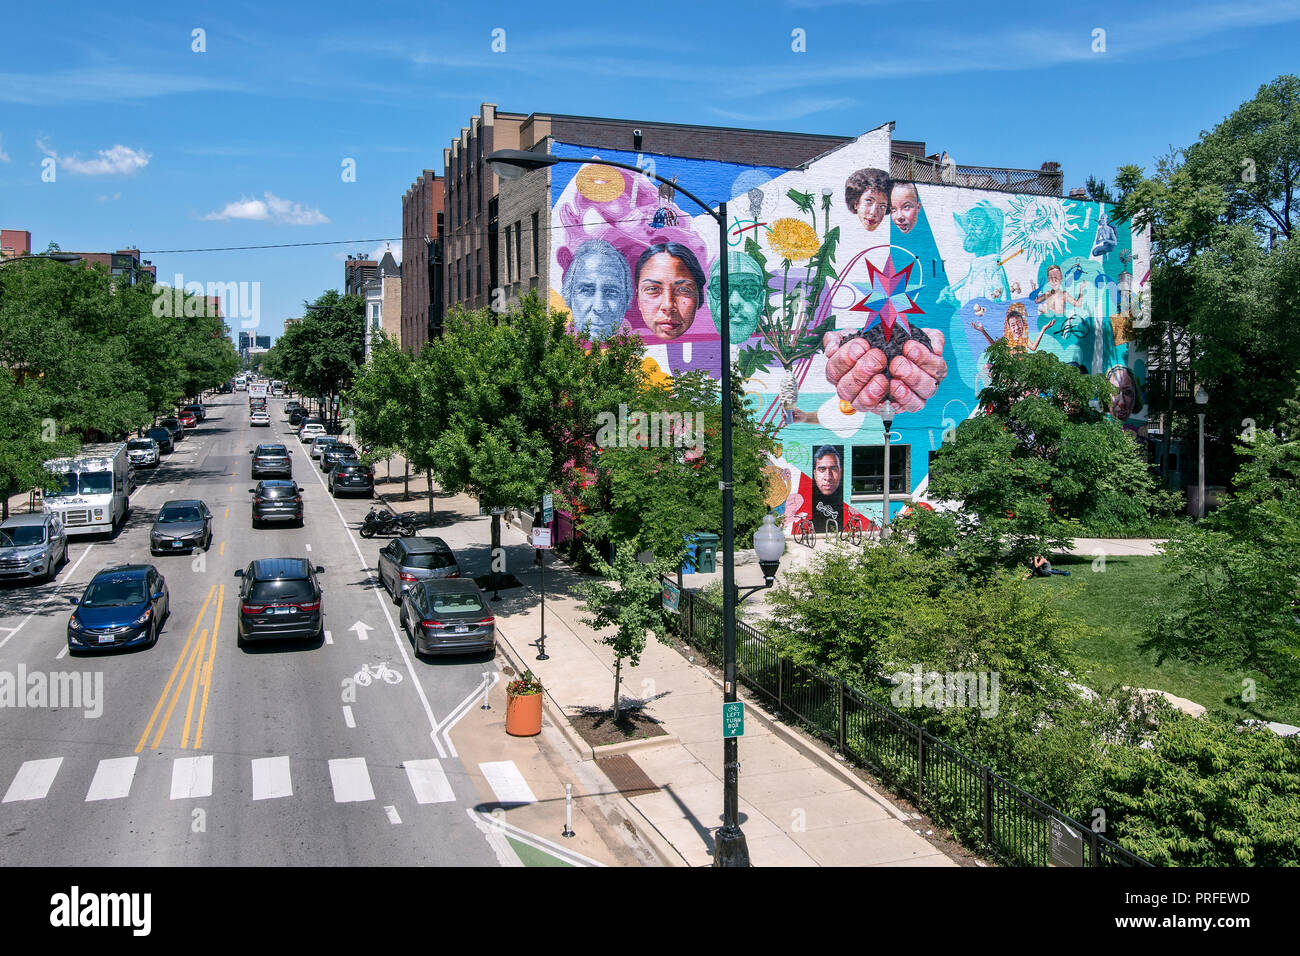 North Milwaukee Avenue with large wall mural, Wicker Park, Chicago, Illinois, USA Stock Photo